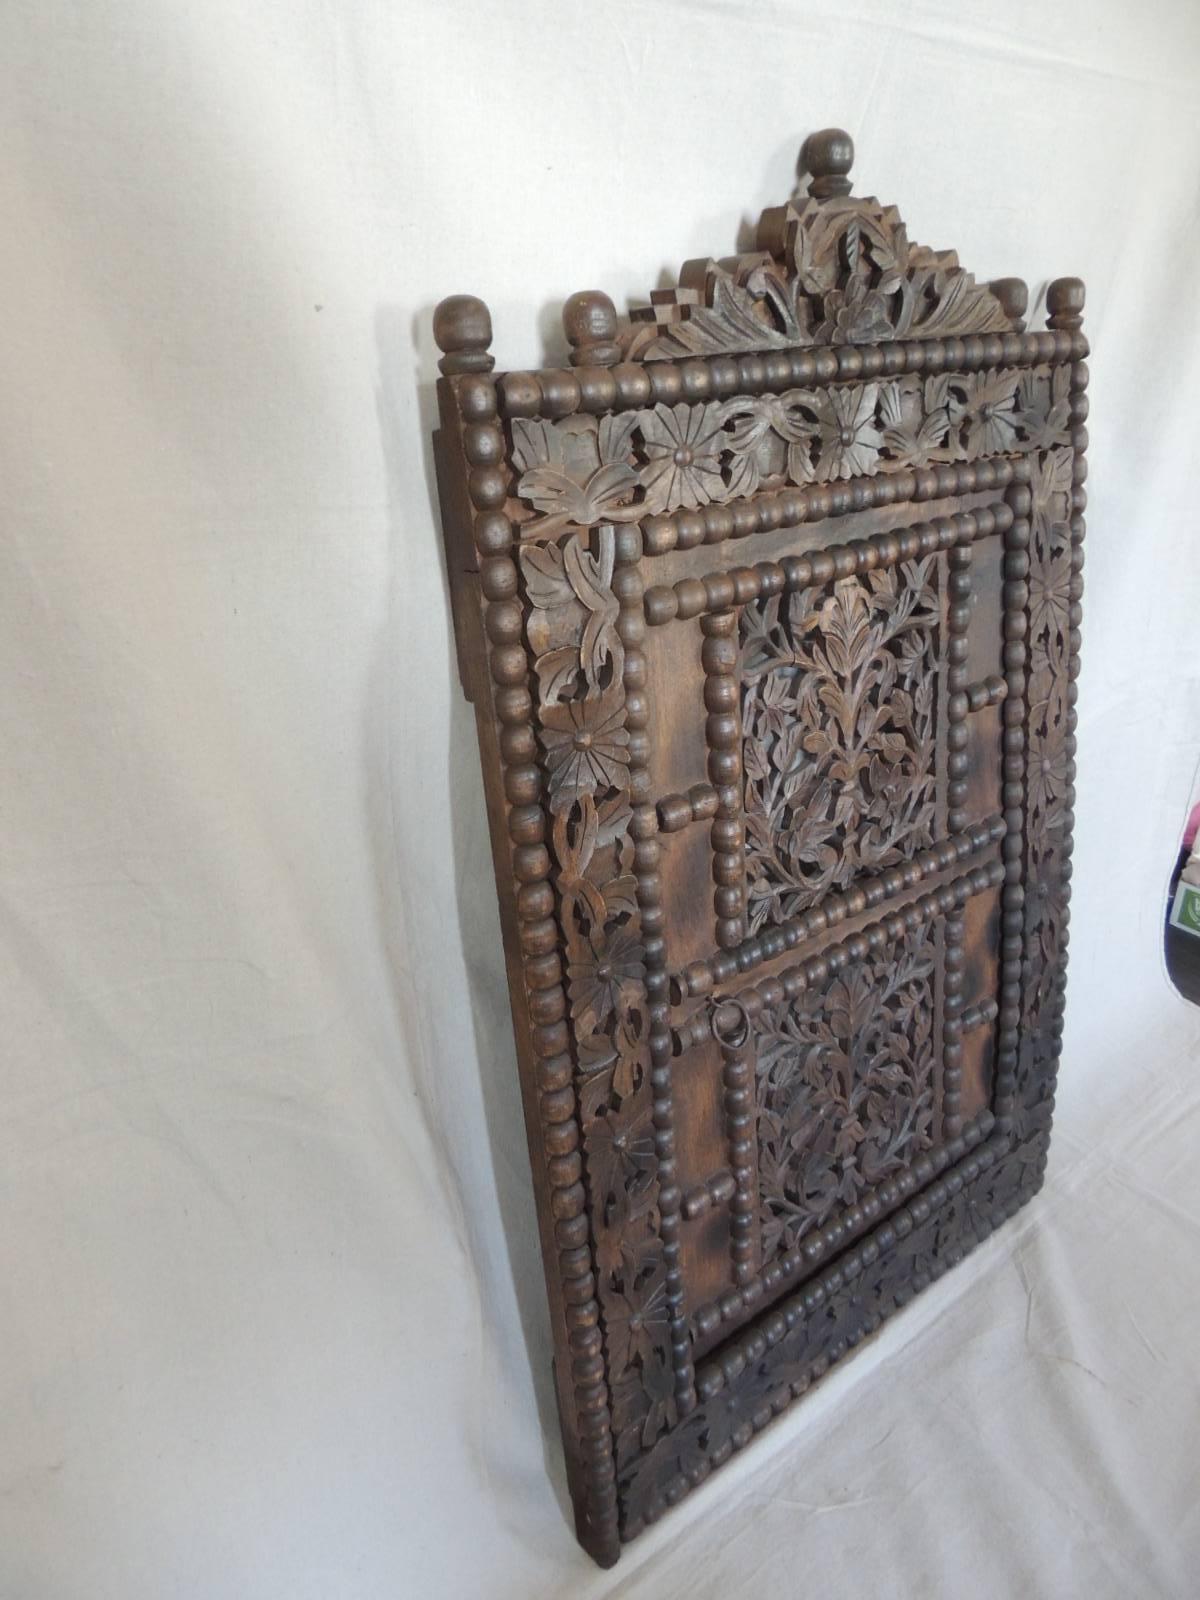 Large antique Indonesian hand-carved window. Teakwood dark stained. The window inset has a pierced carving relief of hand-carved flowers. Looks like it was the upper part of door. The inset window open with hinges to the inside. There is a small